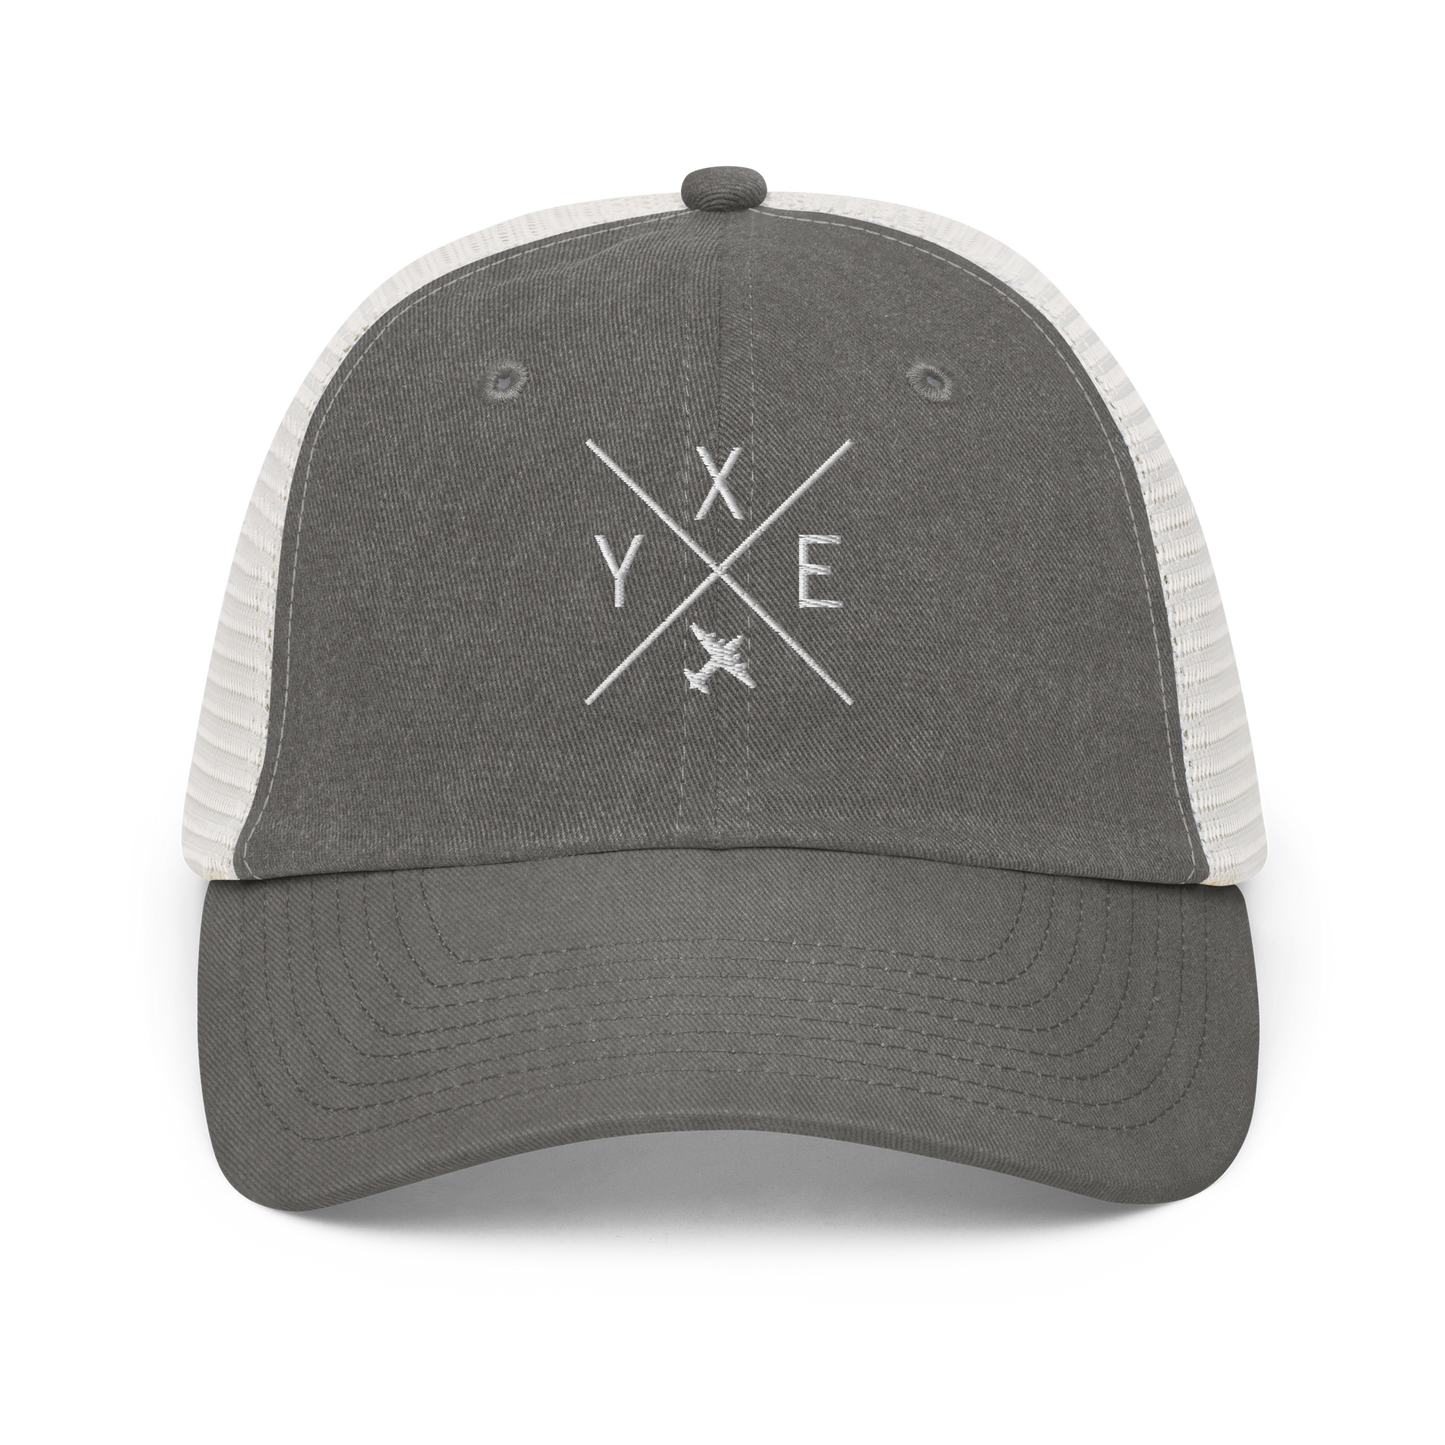 YHM Designs - YXE Saskatoon Pigment-Dyed Trucker Cap - Crossed-X Design with Airport Code and Vintage Propliner - White Embroidery - Image 09